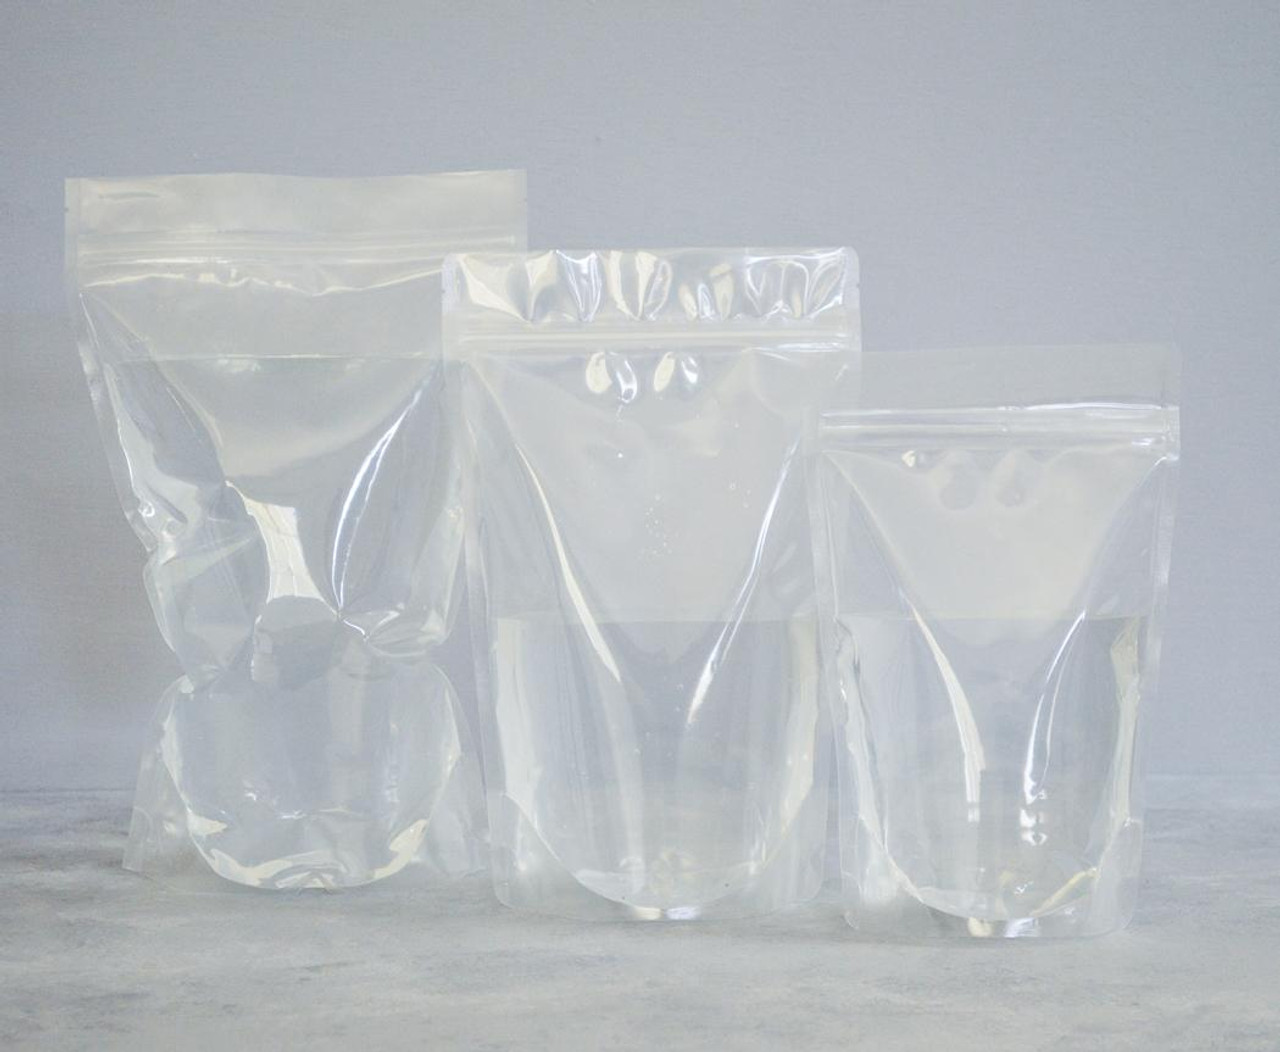 Wholesale Clear Vinyl Gusseted Zippered Pouch - 8 in. x 5 in. x